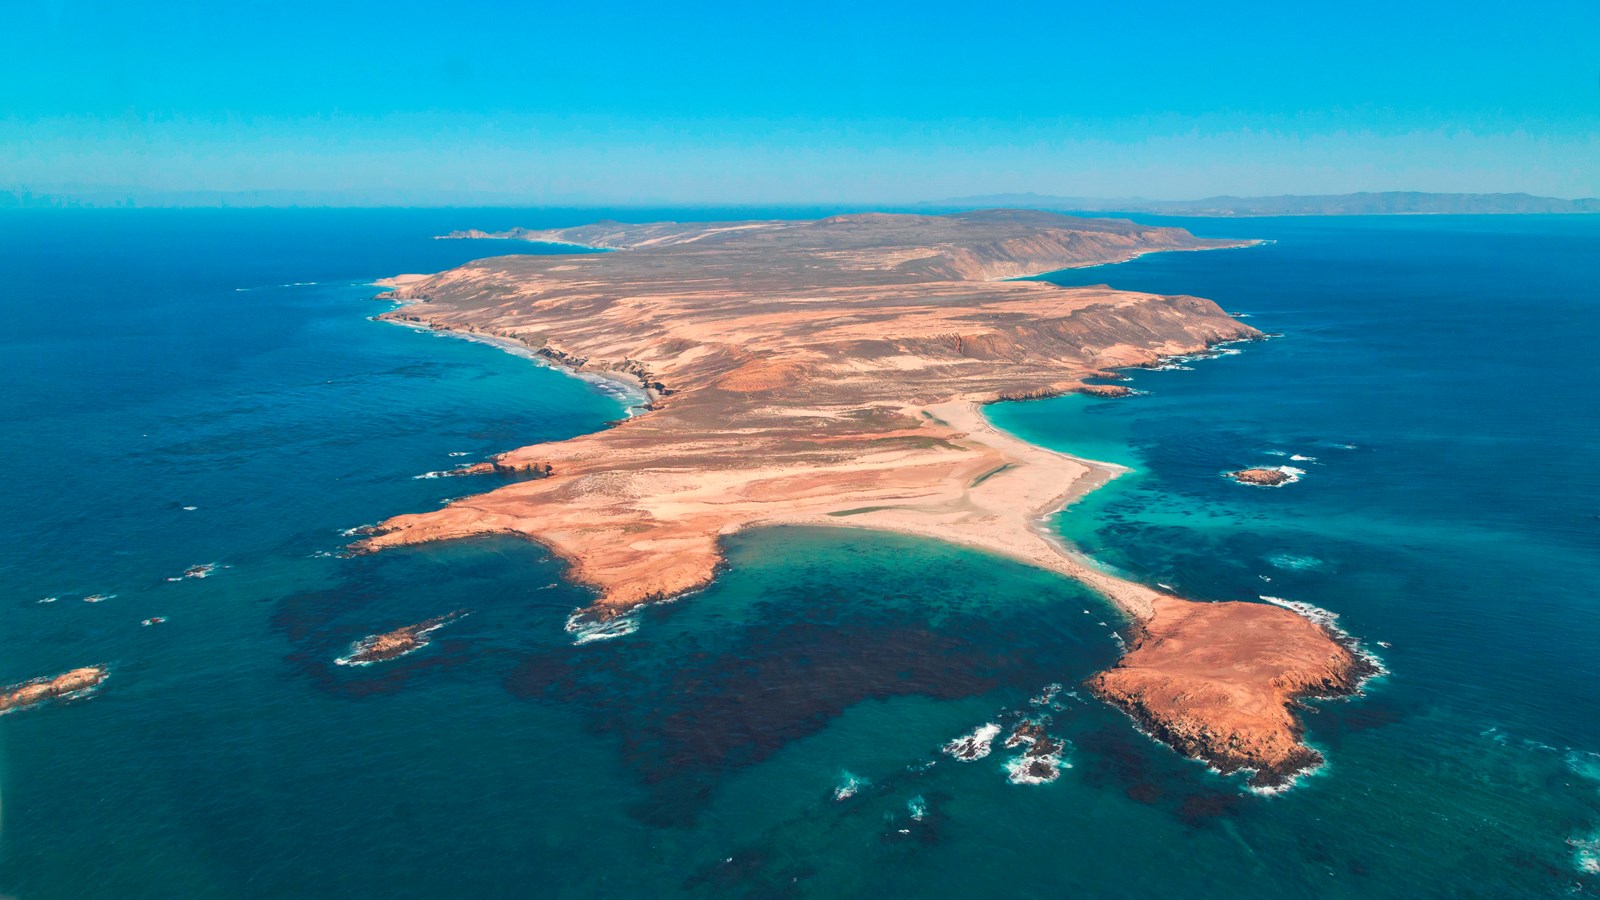 aeiral image of brown island with rugged coast and white beaches